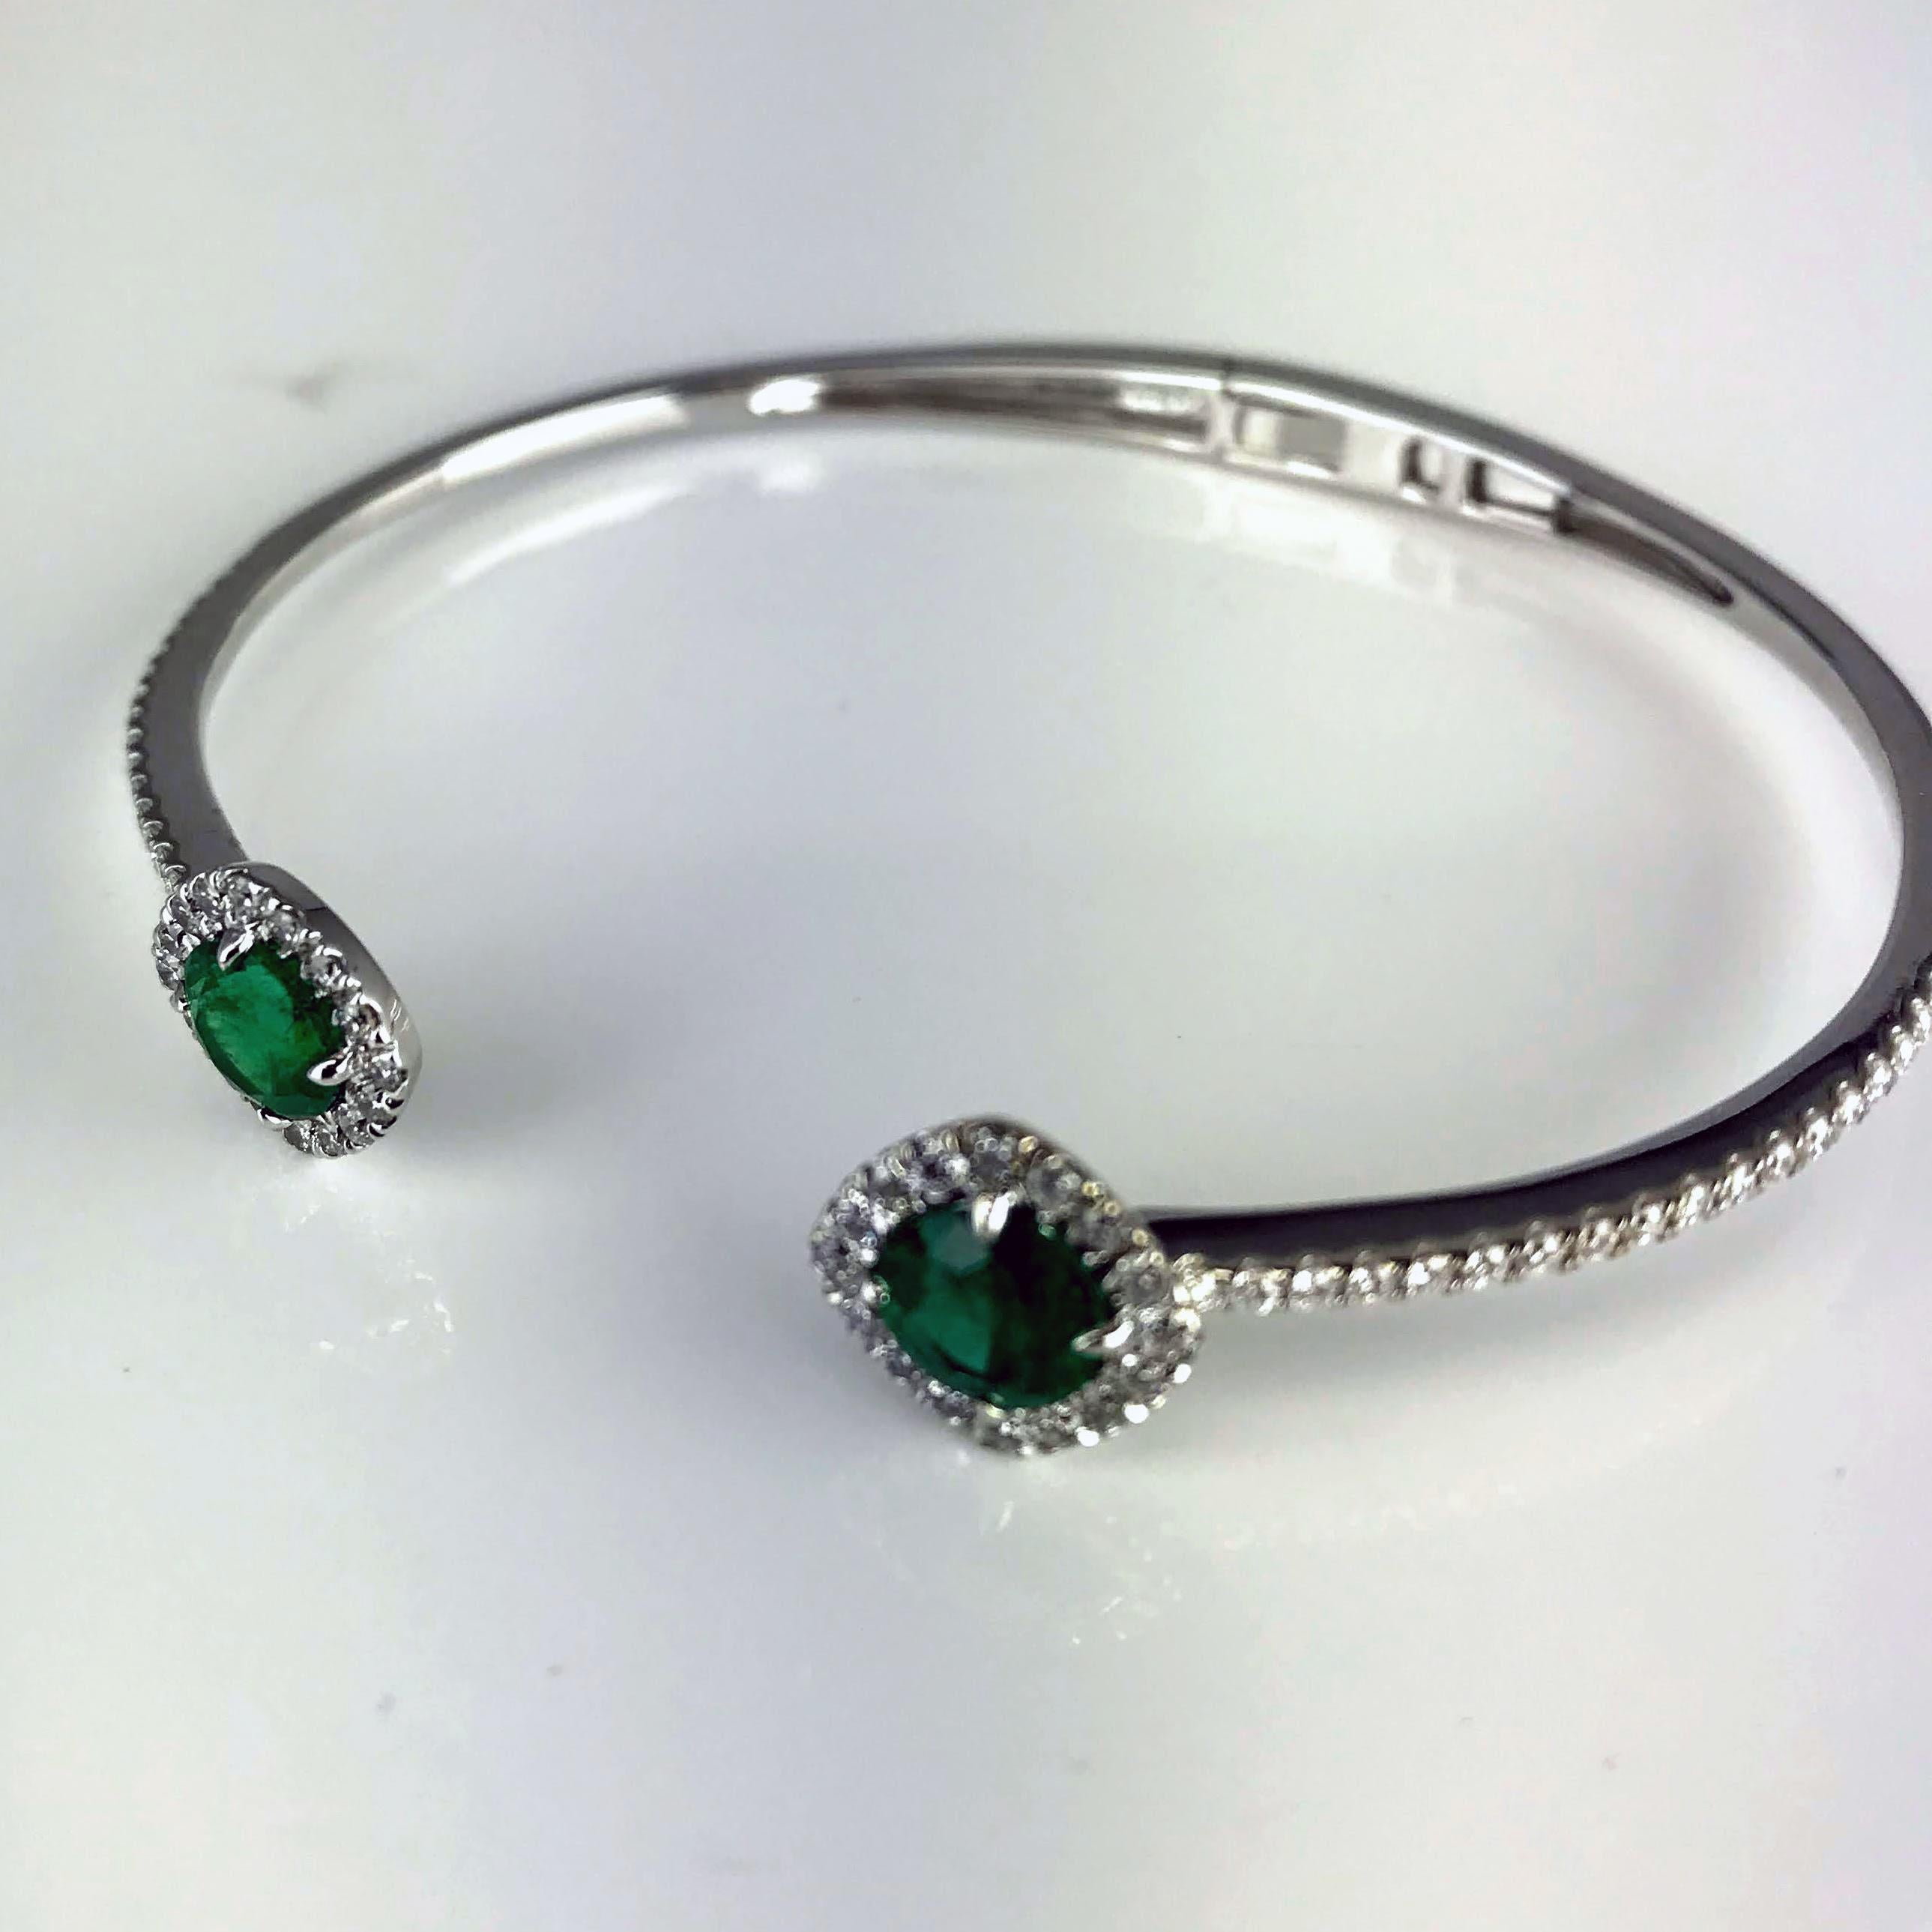 Round Cut 1.02 Carat Round Emerald and Natural Diamond Bangle in 14k White Gold ref189 For Sale